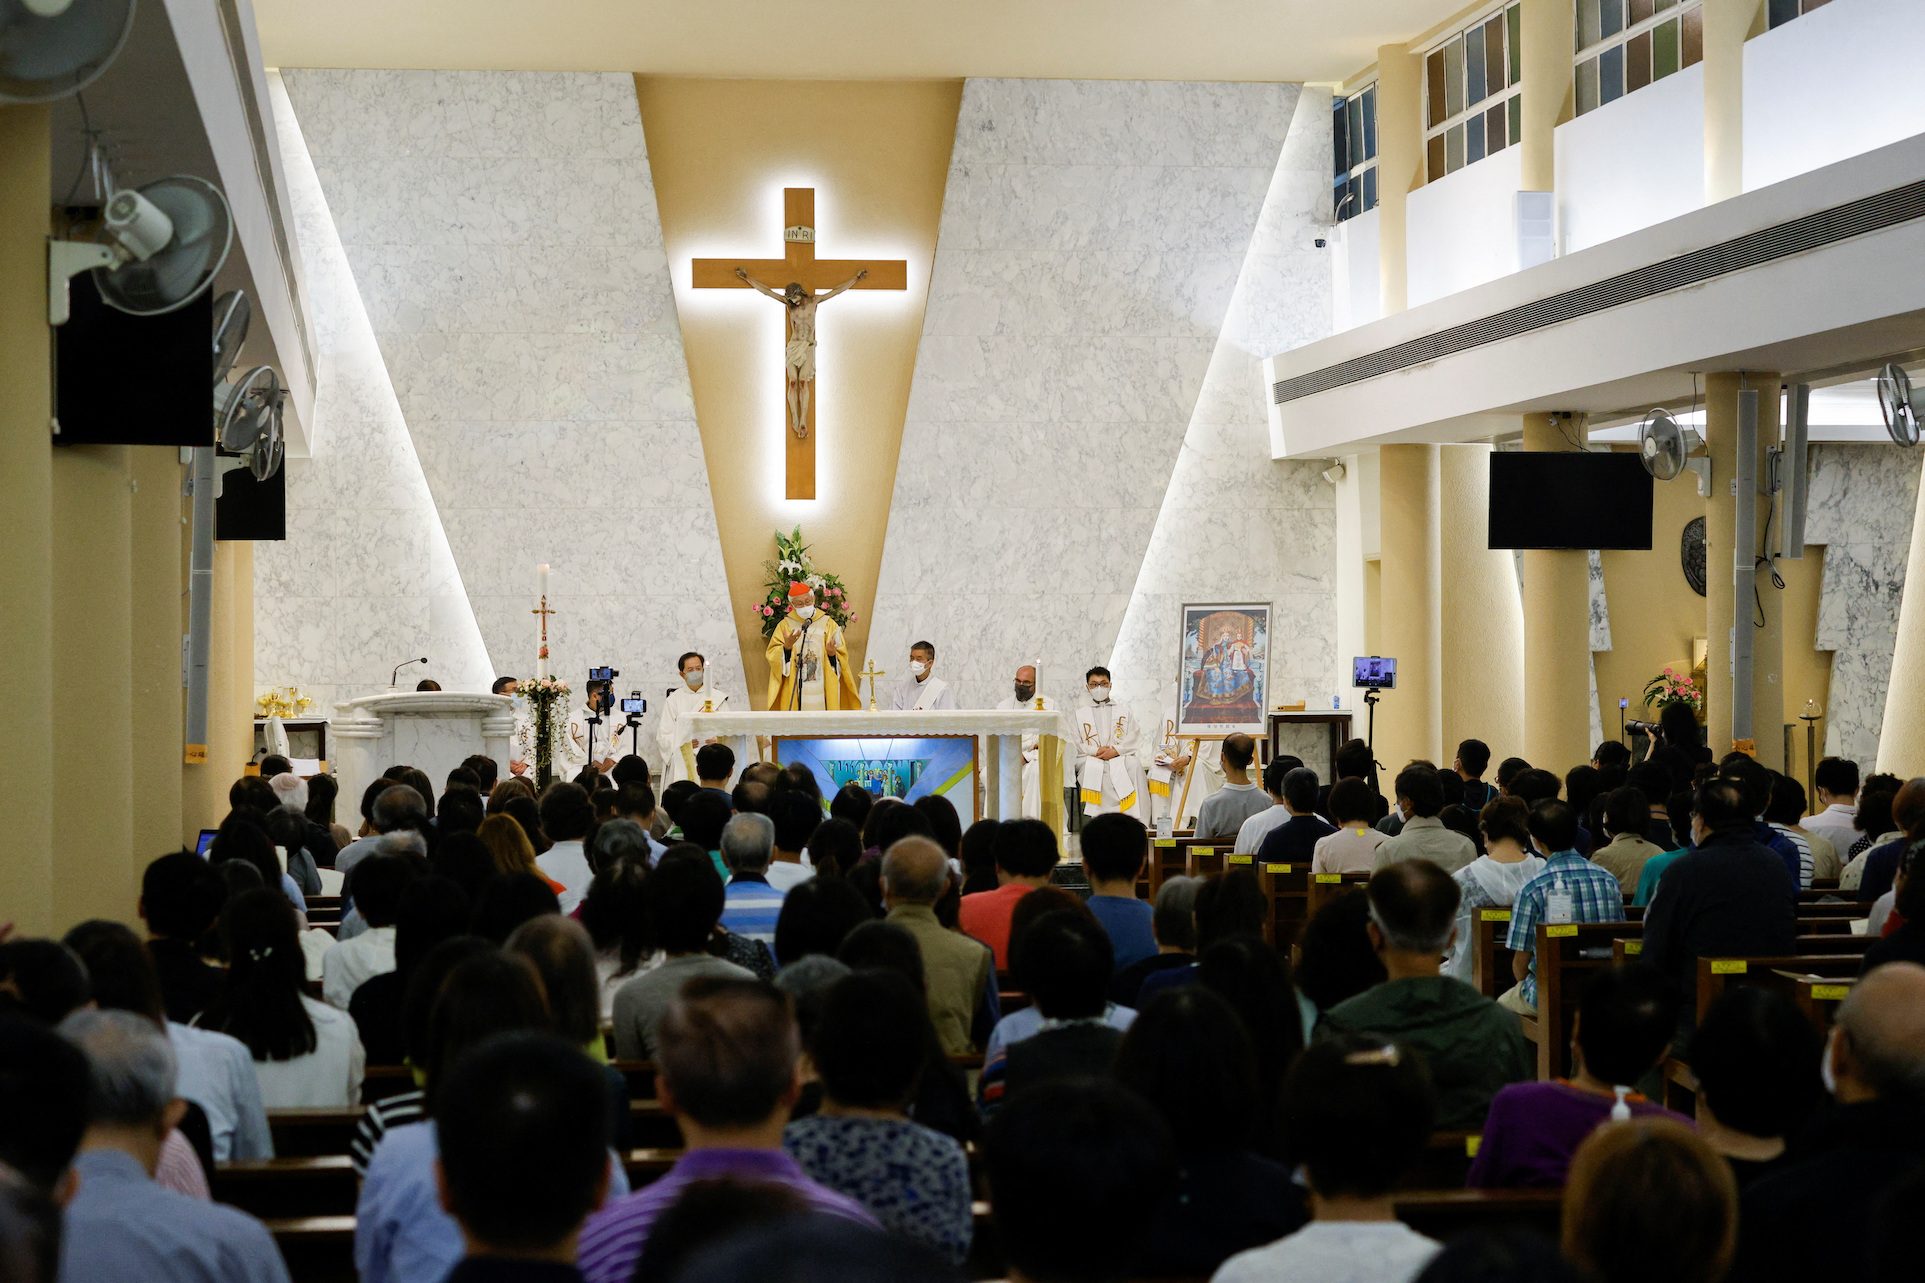 Vatican envoy in Hong Kong warns Catholic missions to prepare for China crackdown